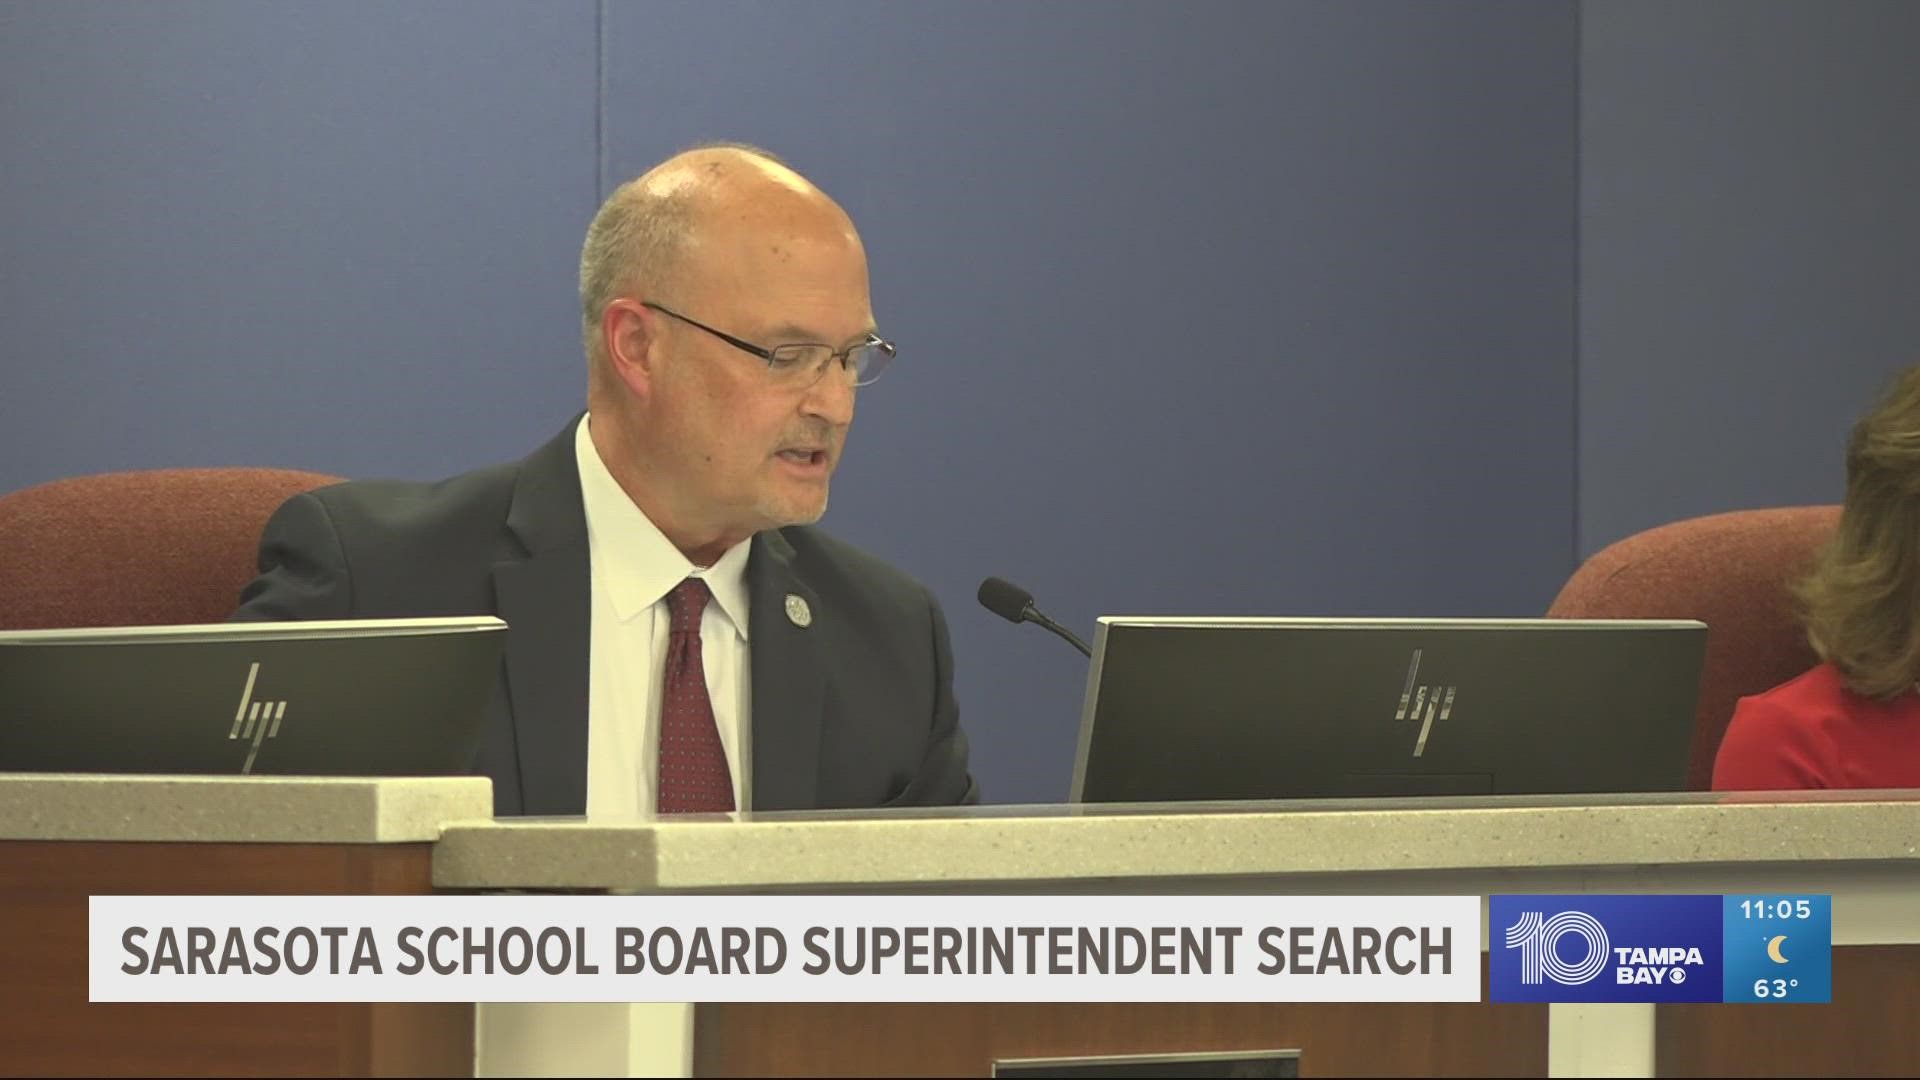 Former Superintendent Brennan Asplen was controversially terminated from his role.